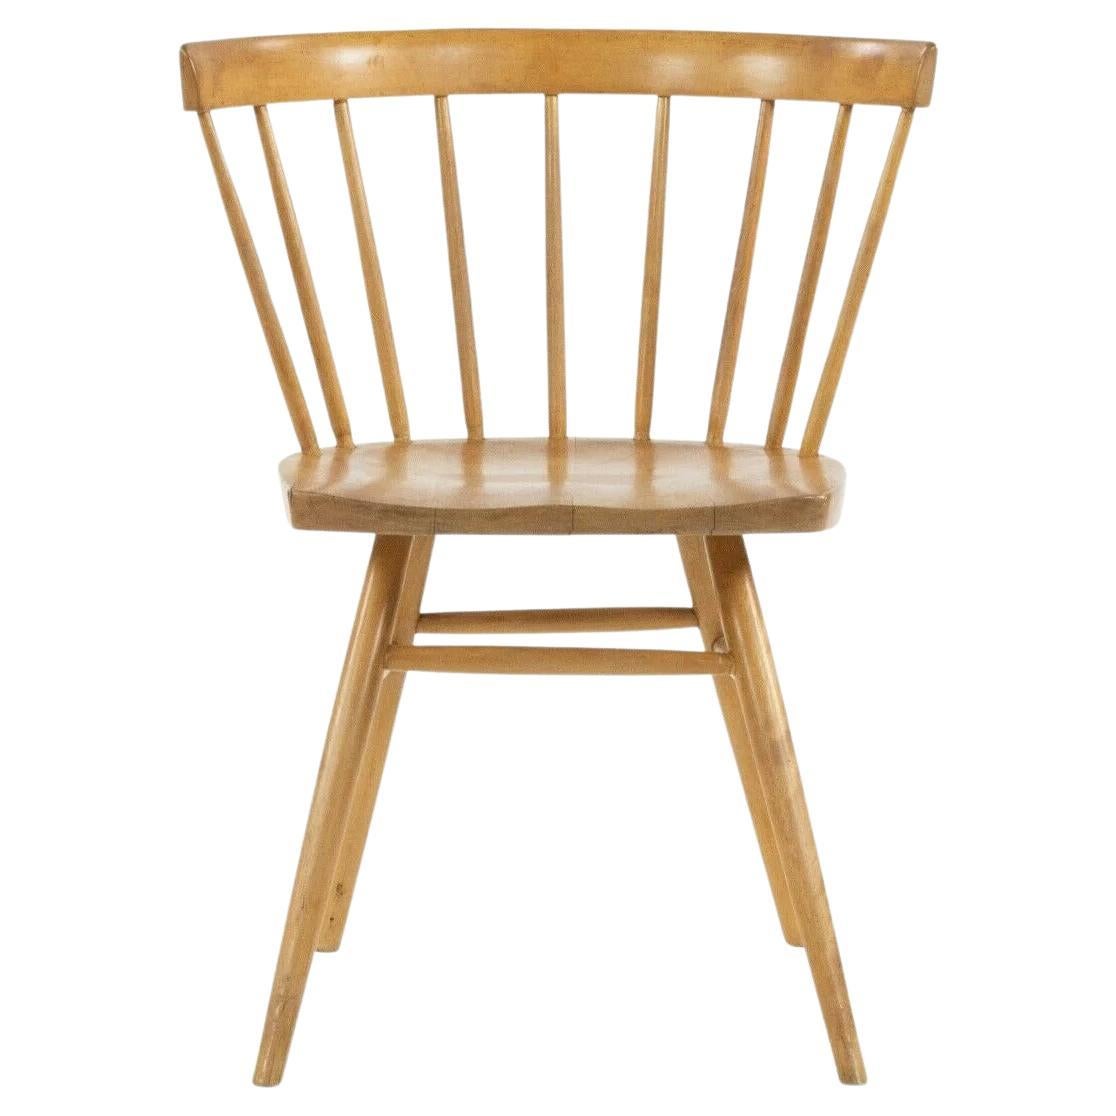 1947 George Nakashima for Knoll N19 Straight Chair in Natural Birch For Sale